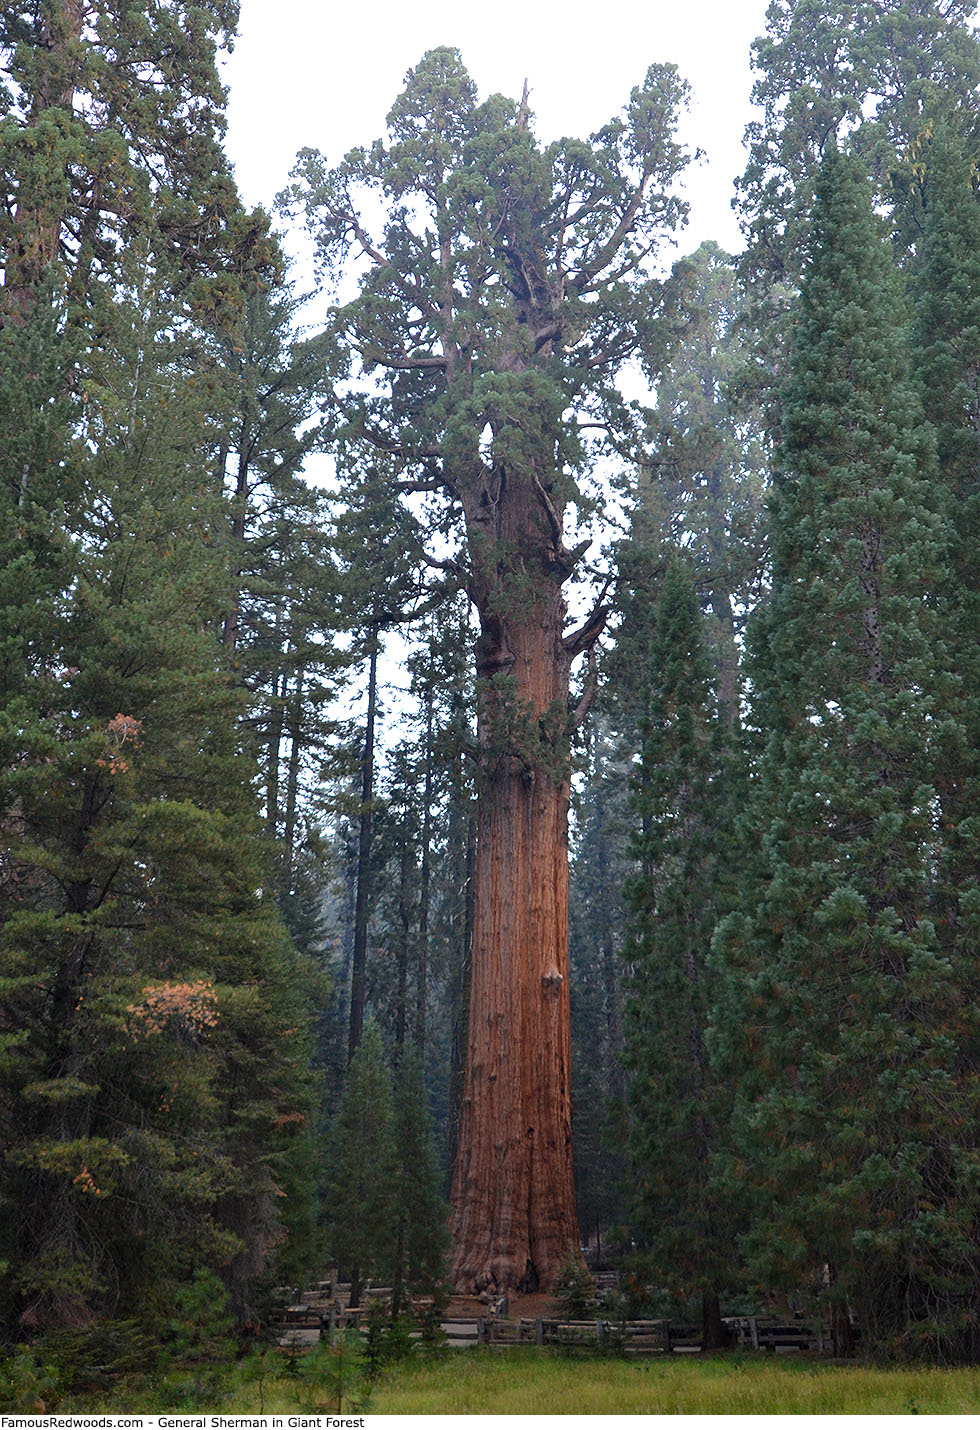 Giant Forest - General Sherman Tree